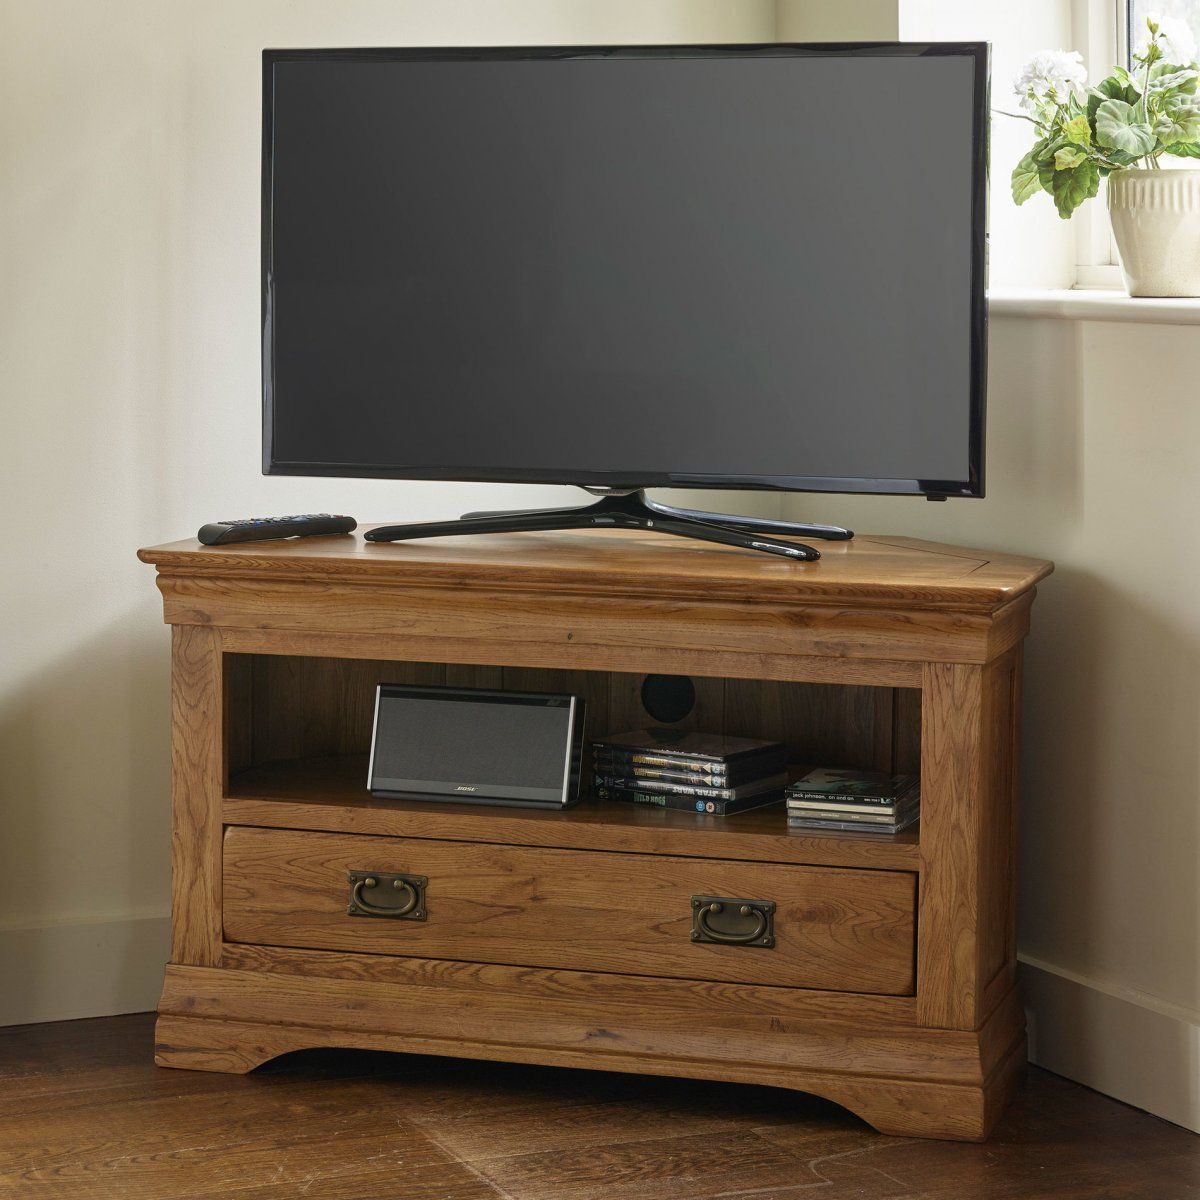 French Farmhouse Corner Tv Unit | Solid Oak | Oak Intended For Avalene Rustic Farmhouse Corner Tv Stands (View 5 of 15)